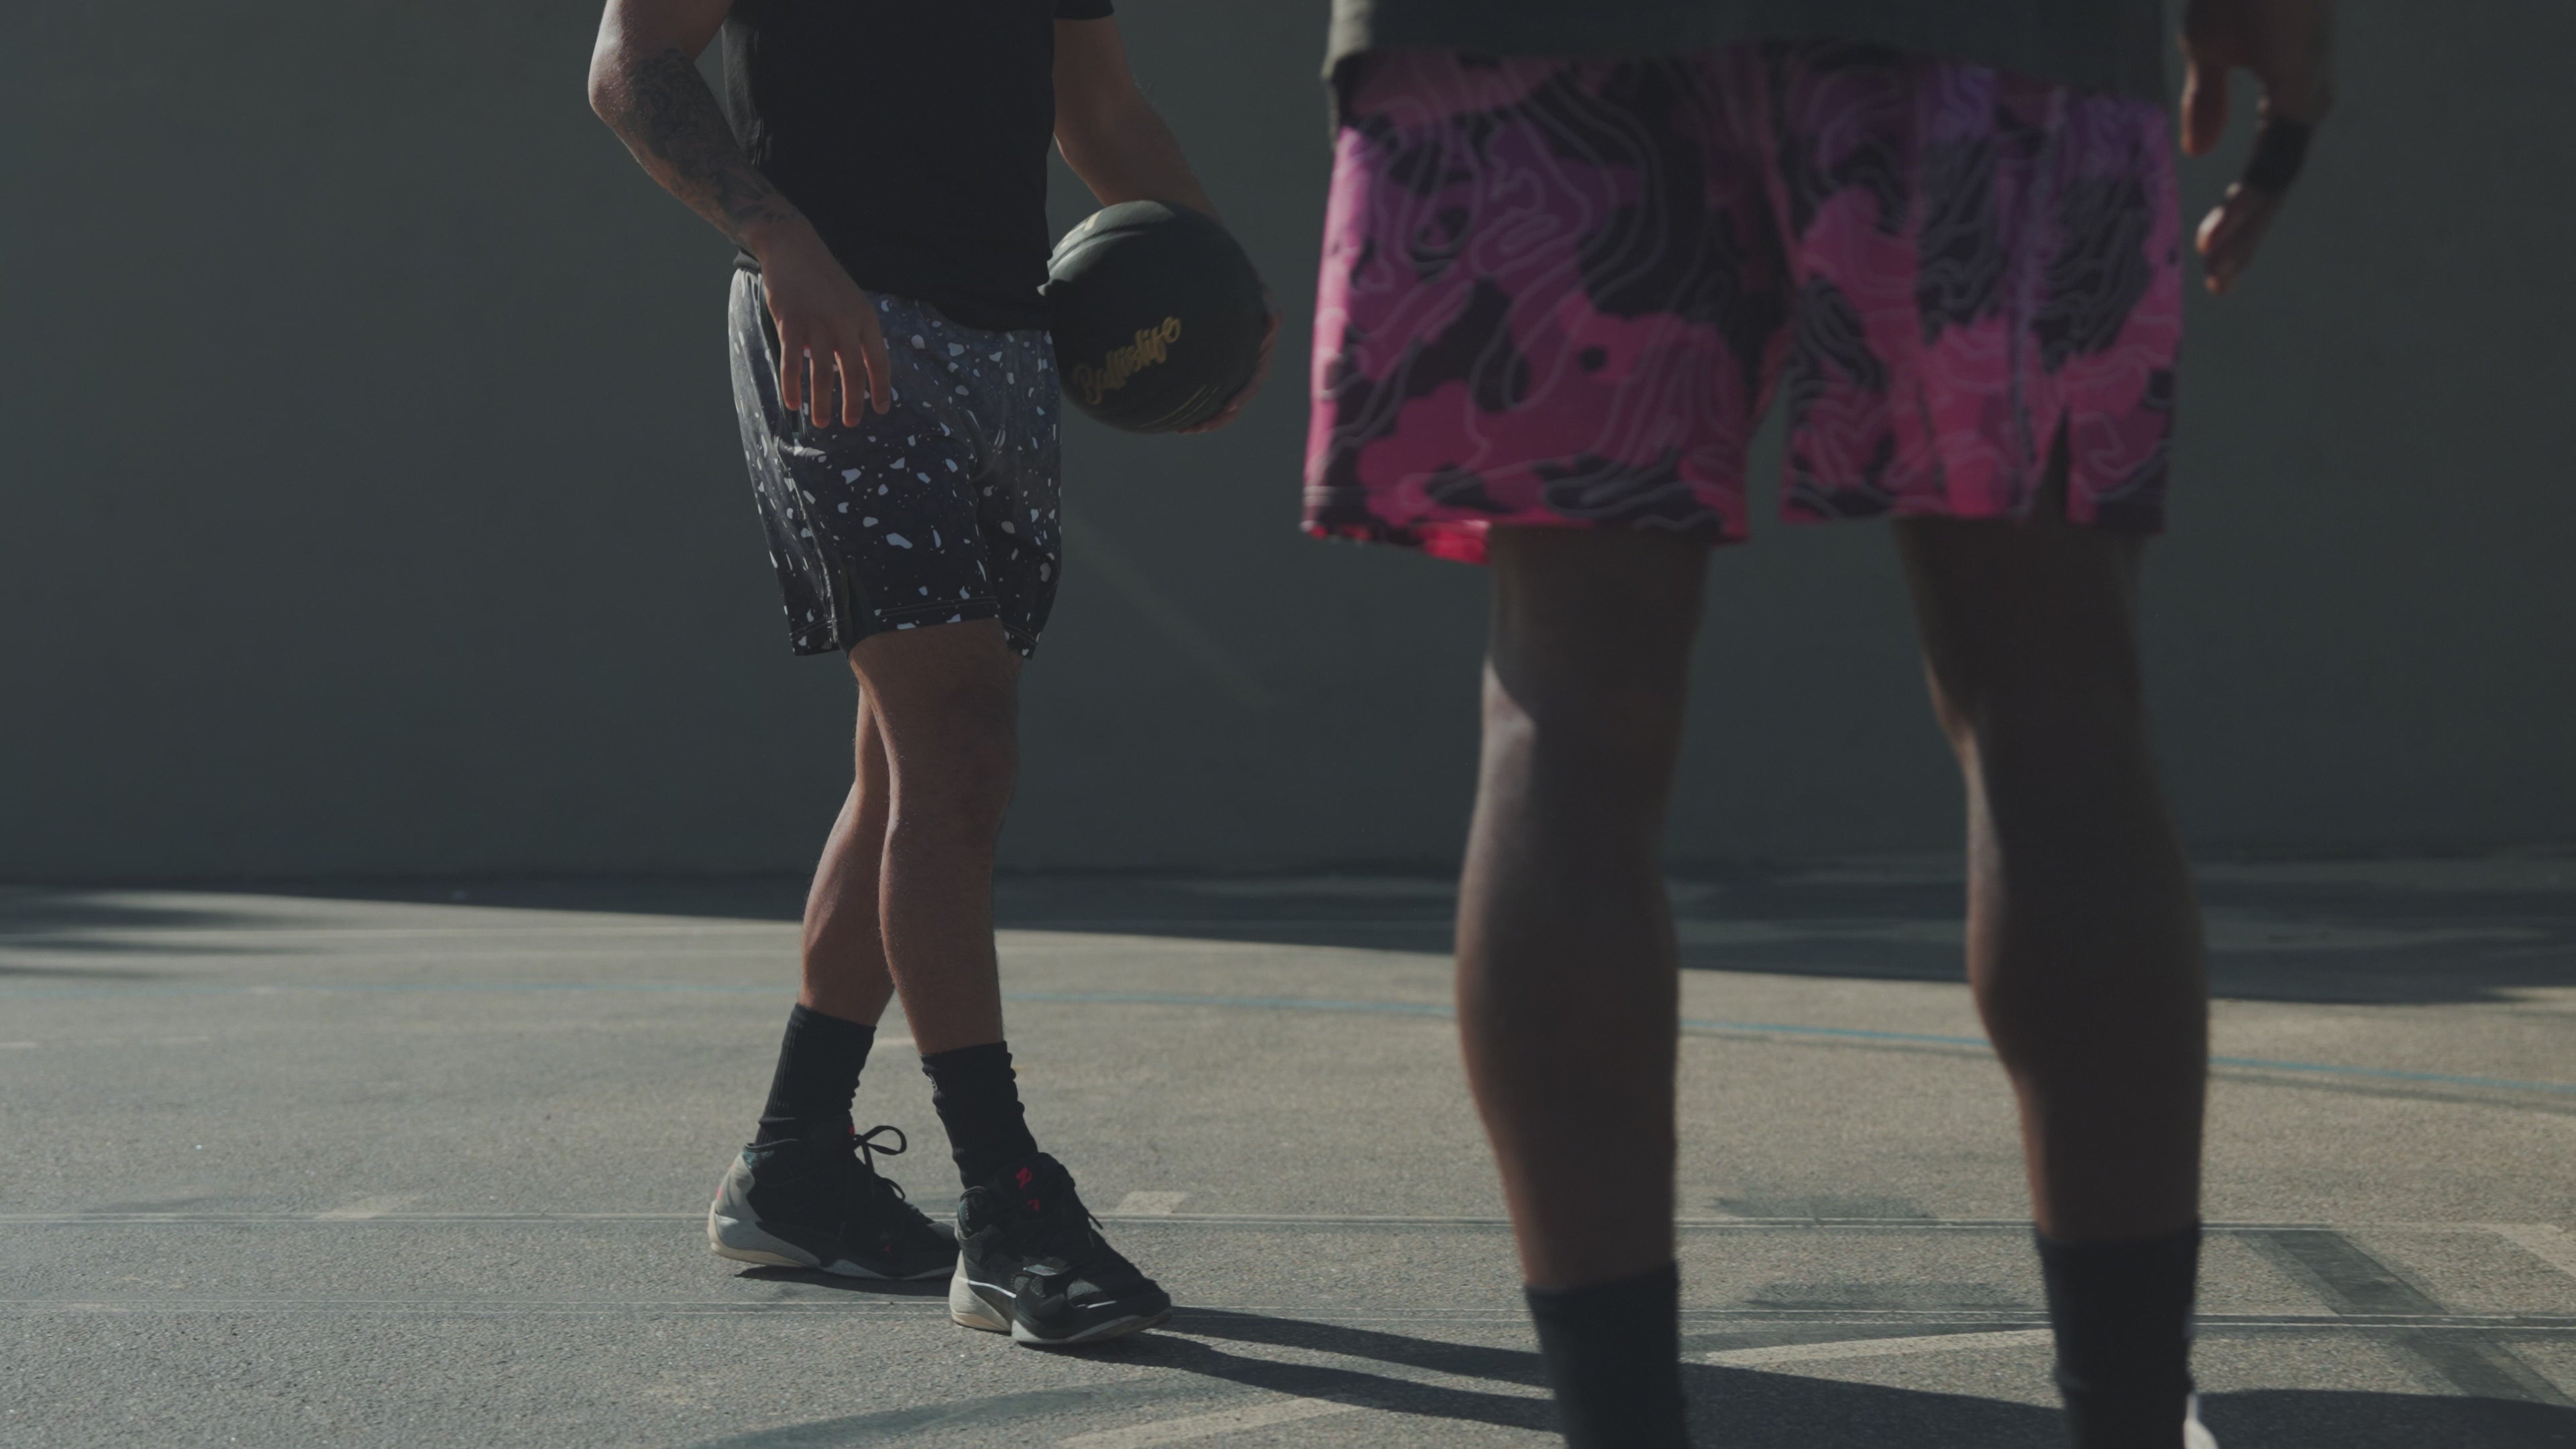 Shop LVM LA NBA-Inspired Shorts Collection - Queen Ballers Club